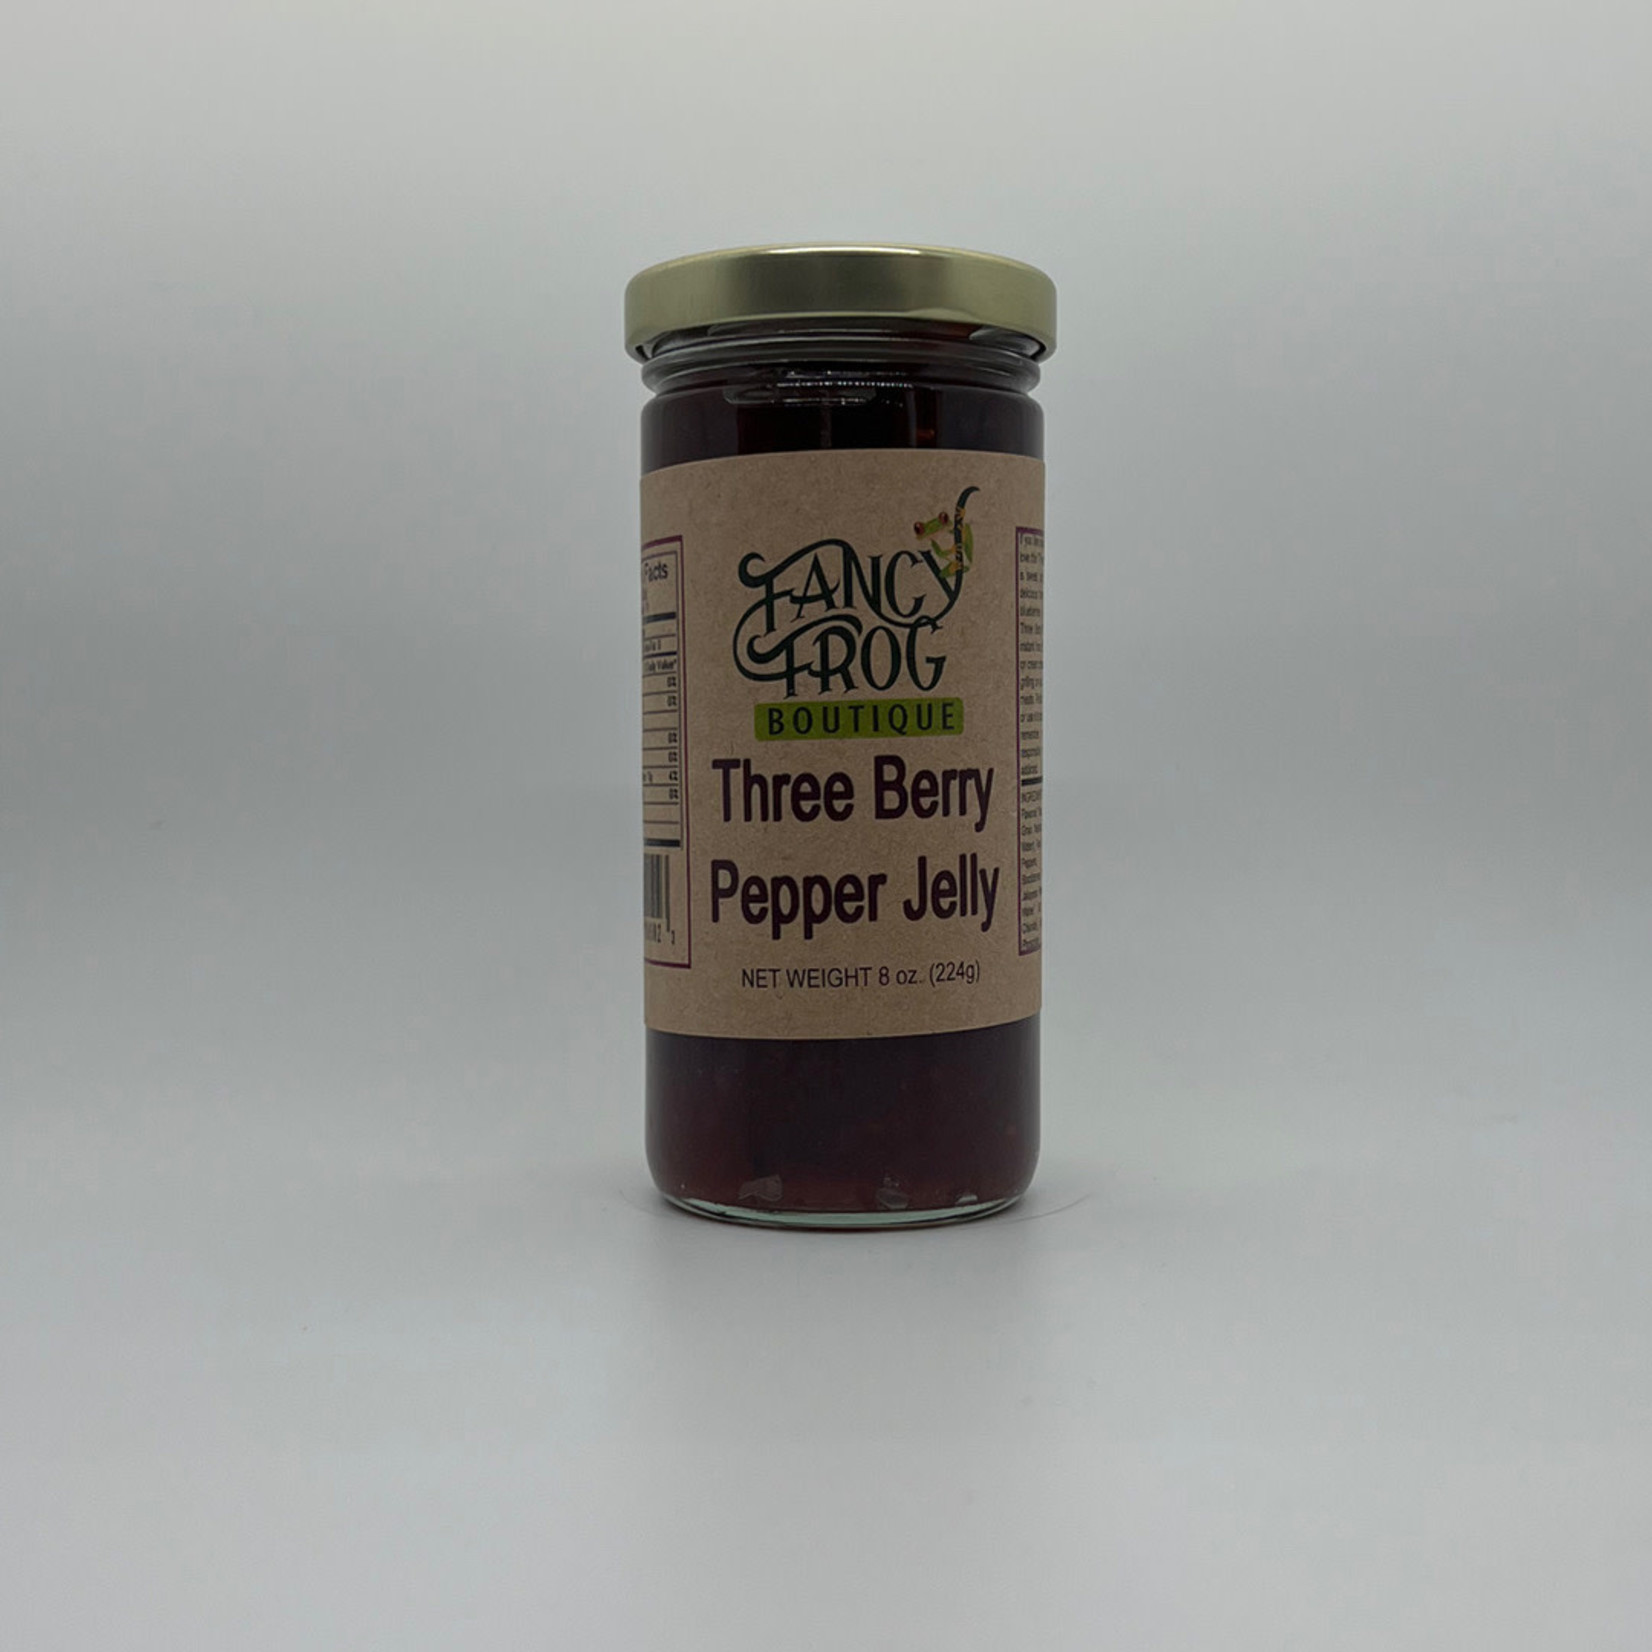 Fancy Frog Boutique Three Berry Pepper Jelly